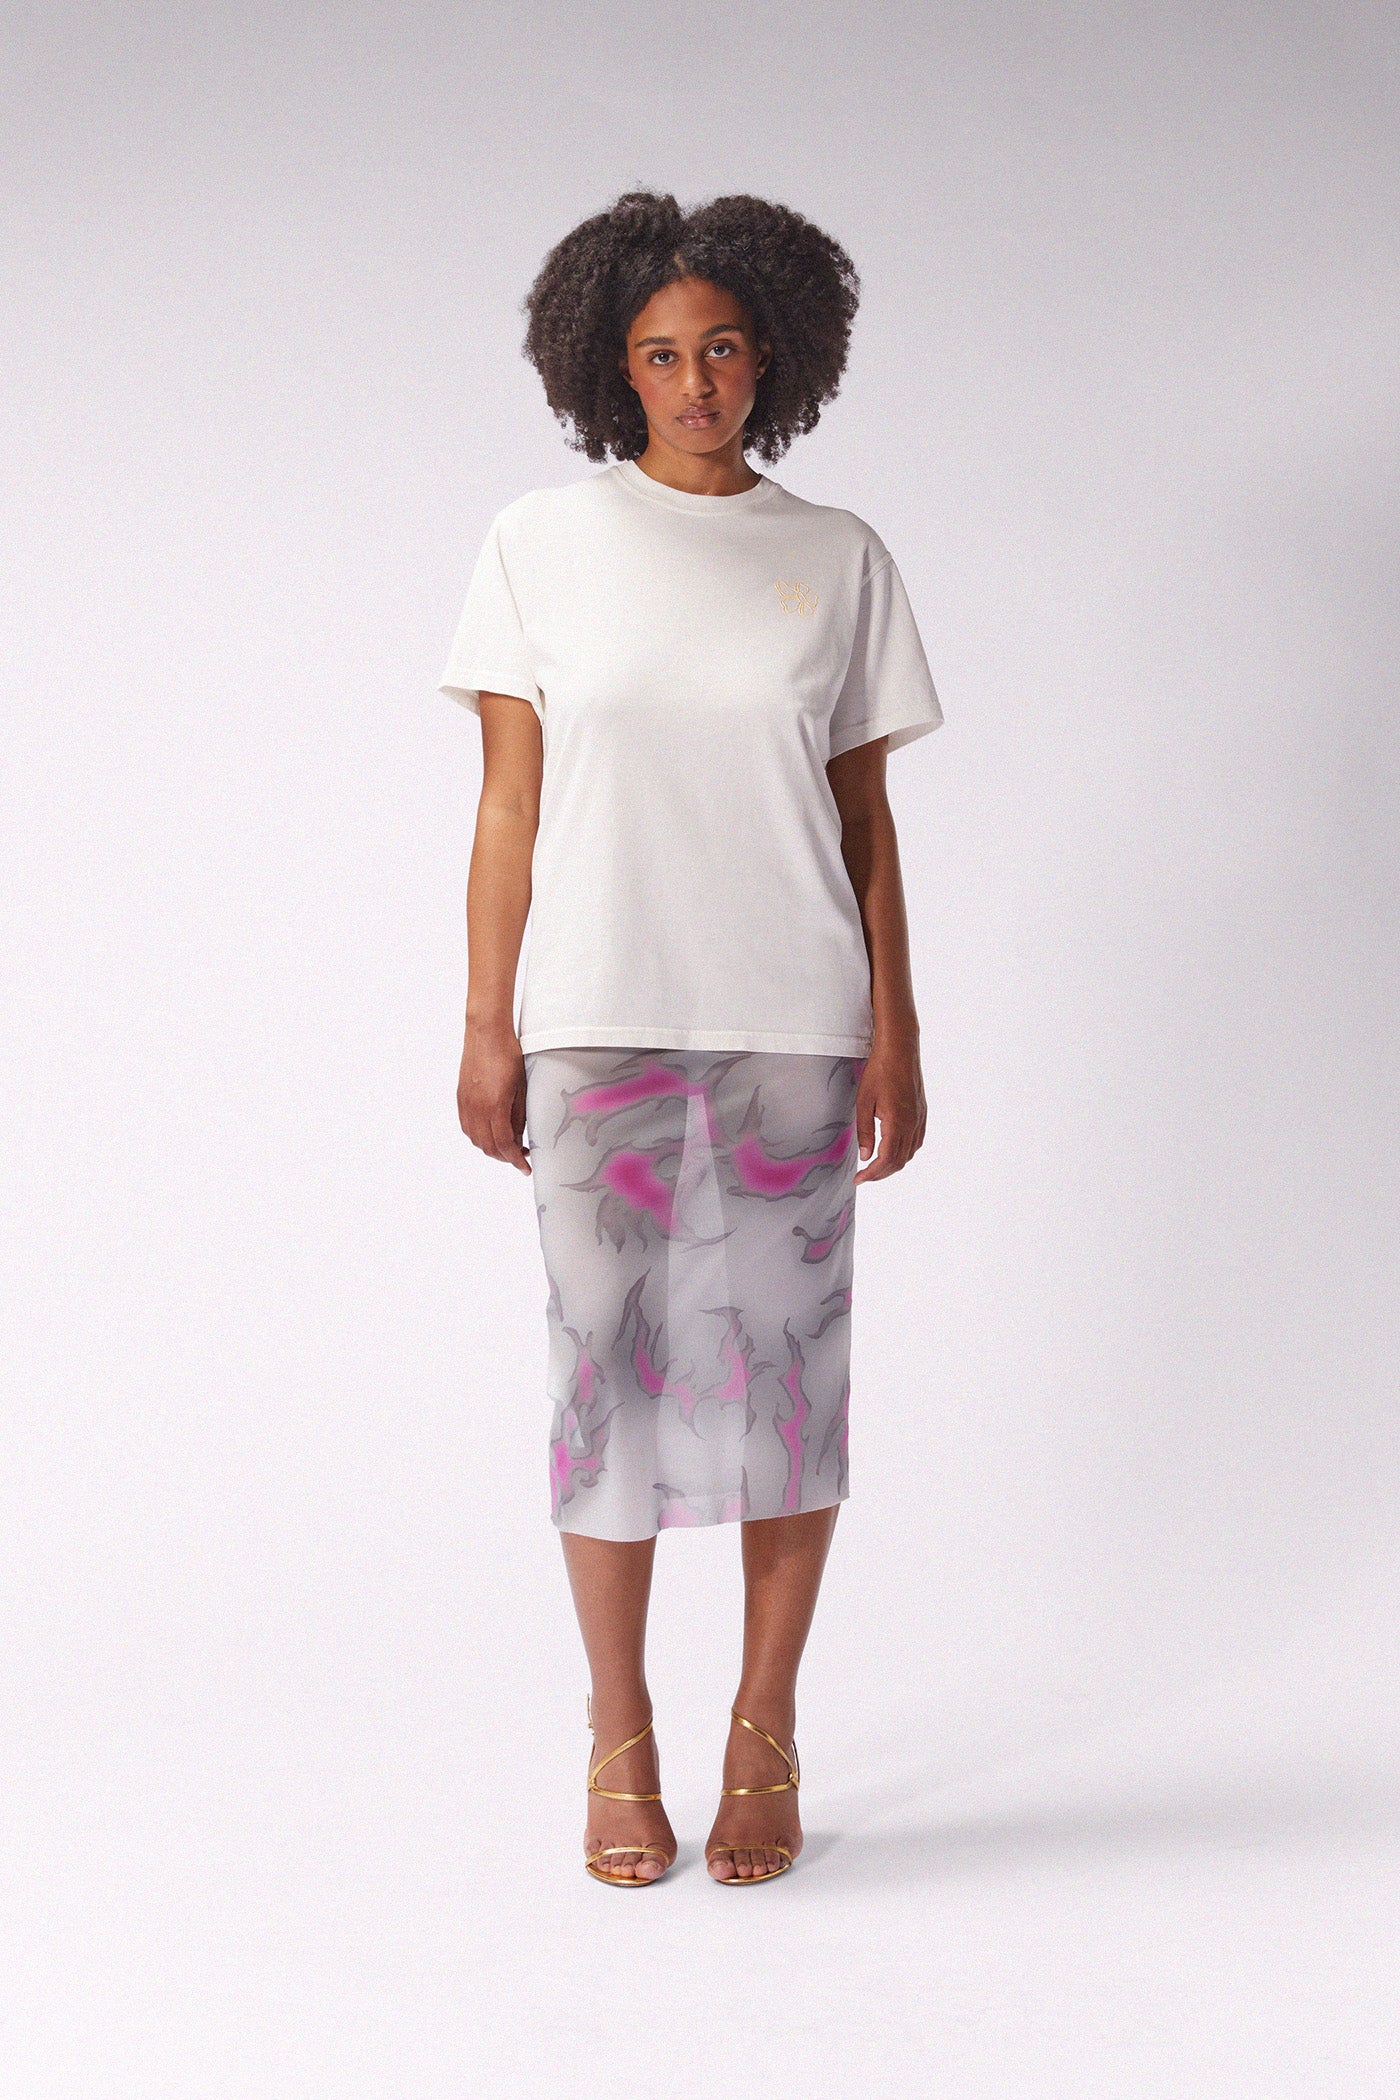 MACCAPANI - THE OVER SKIRT - PEARL GREY AND NEON PINK